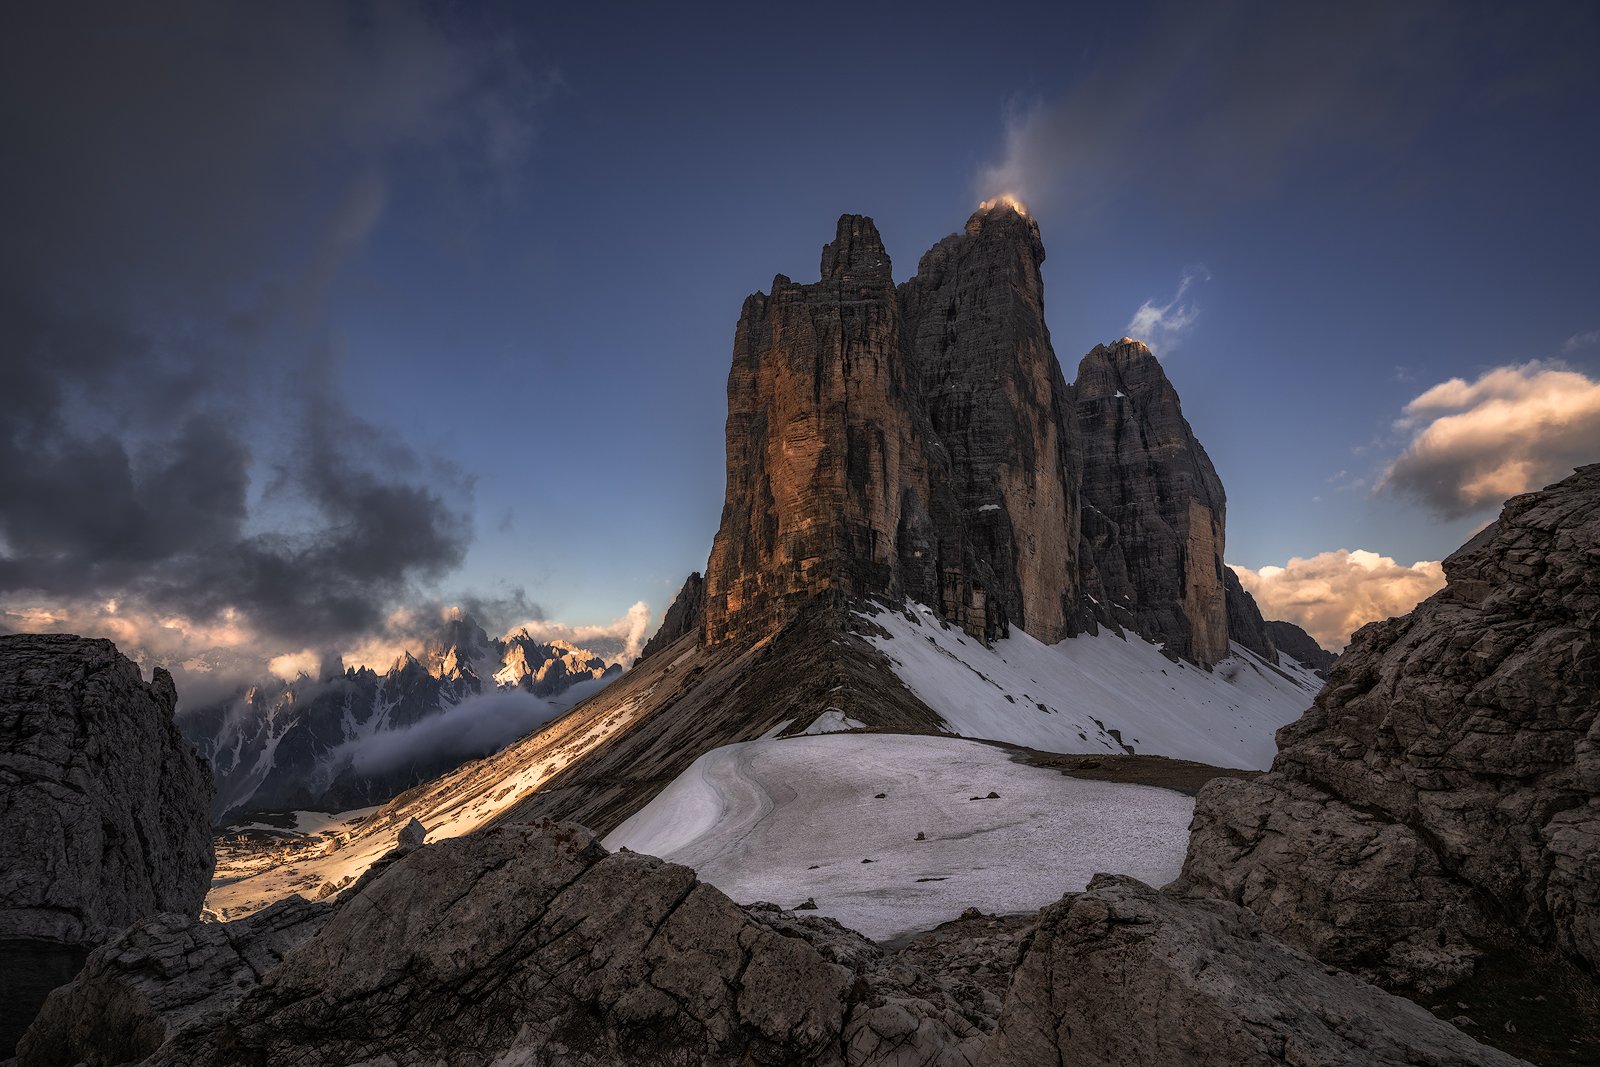 alps, Awakening, Beauty, Chalk Stone, Cliffs, Clouds, Dolomites, fog, foggy, hiking, Italy, Klimbing, mist, Misty, morning, Morning Glow, Mountain Range, Mountain Top, Mountaineers, mountains, nature, outdoors, Pinnacles, Rocks, scenic, Snow, snow-capped,, Ludwig Riml